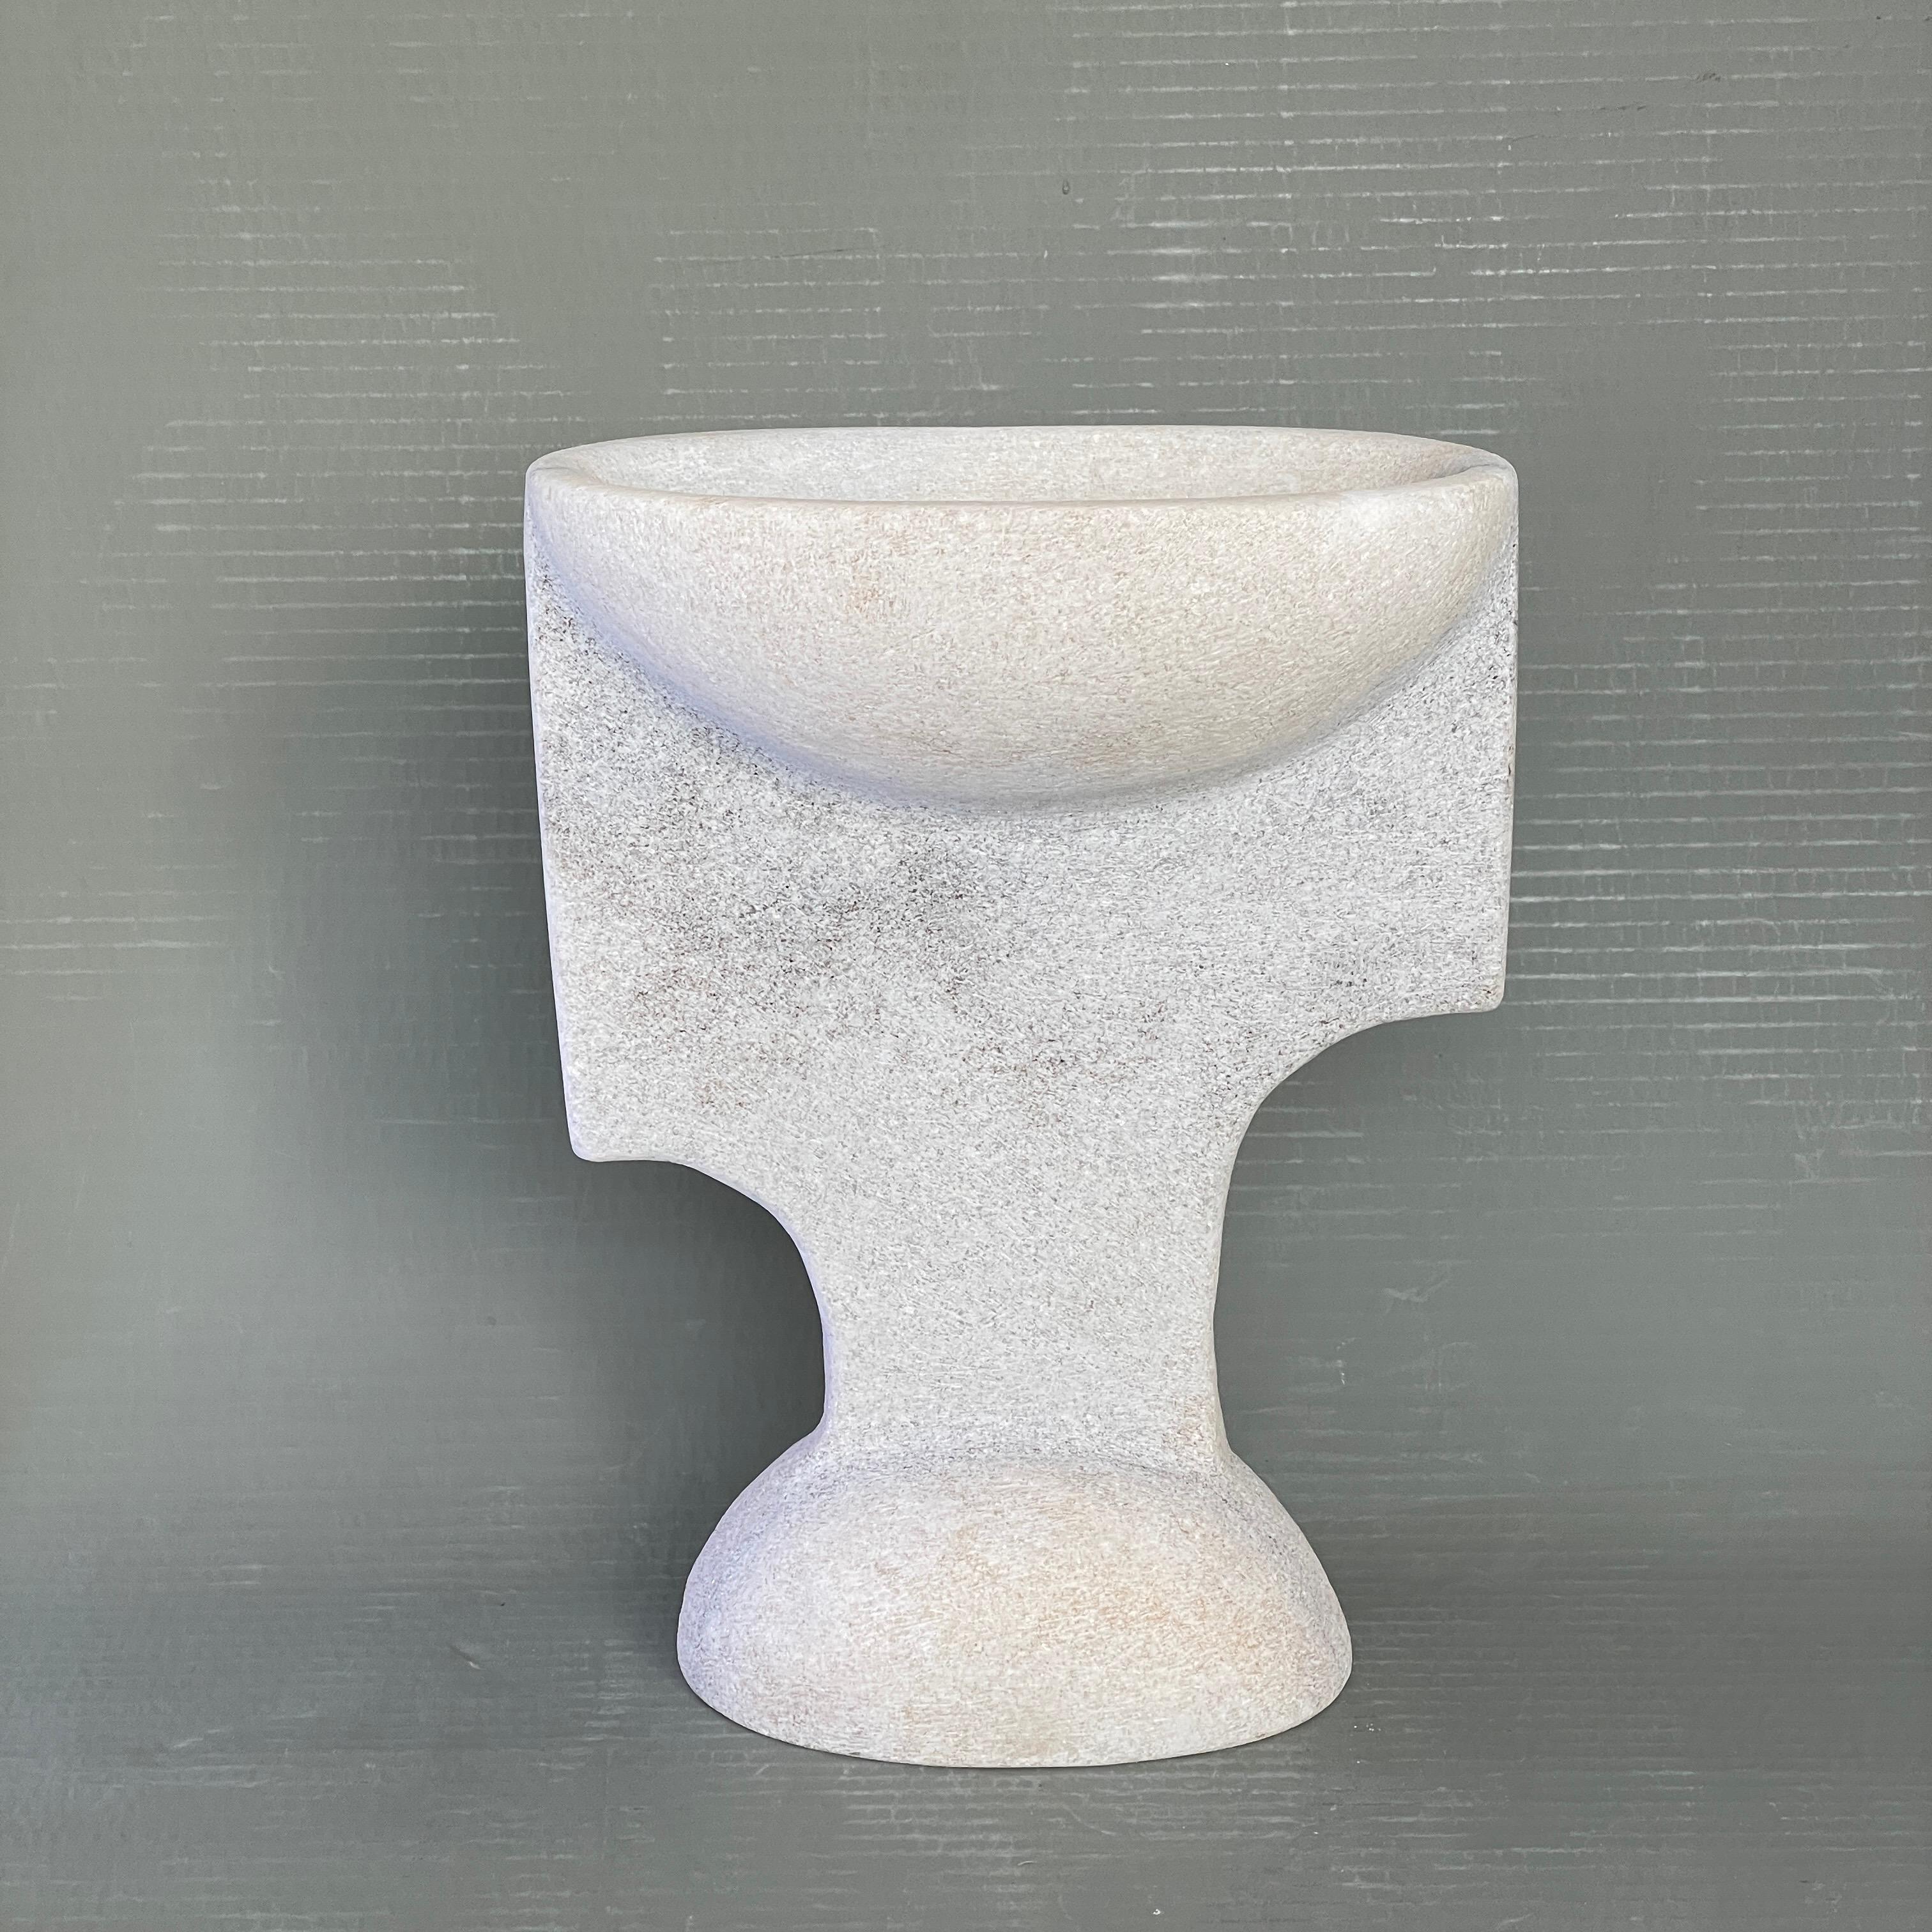 Hand carved marble vessel by Tom Von Kaenel
Materials: marble
Dimensions: W 11 x D 20 x H 26 cm

Tom von Kaenel, sculptor and painter, was born in Switzerland in 1961. Already in his early
Childhood he was deeply devoted to art. His desire to